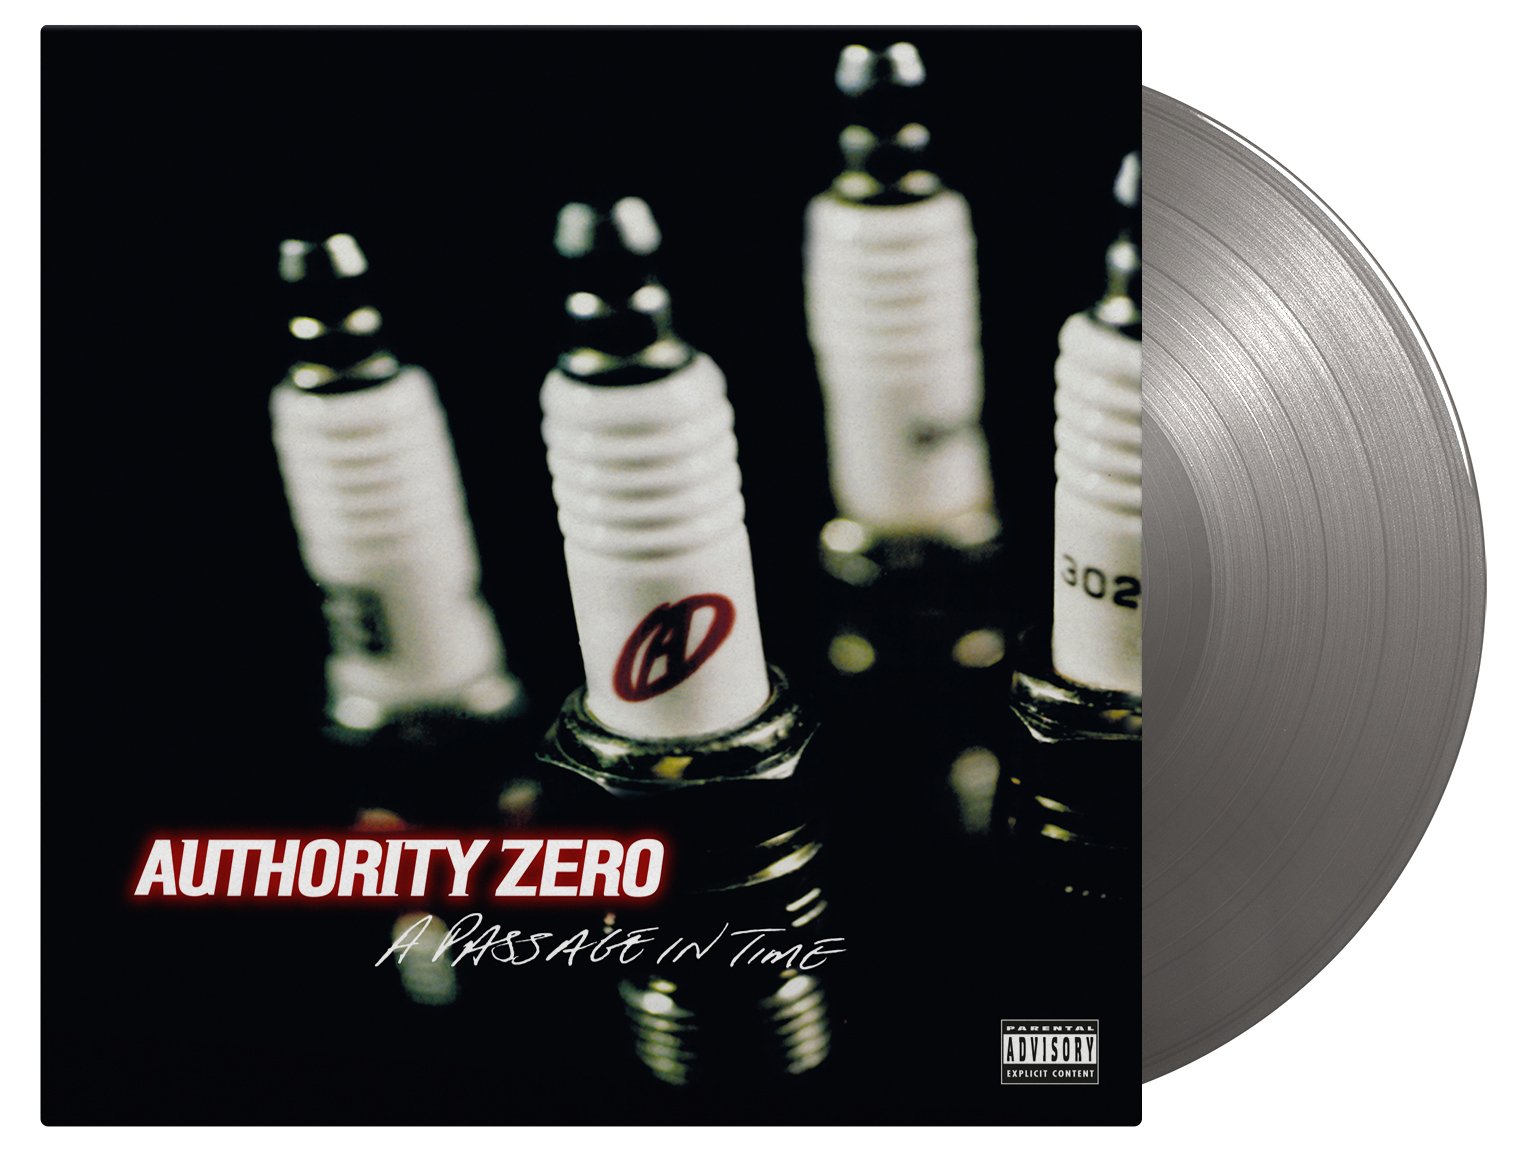 CD Shop - AUTHORITY ZERO A PASSAGE IN TIME